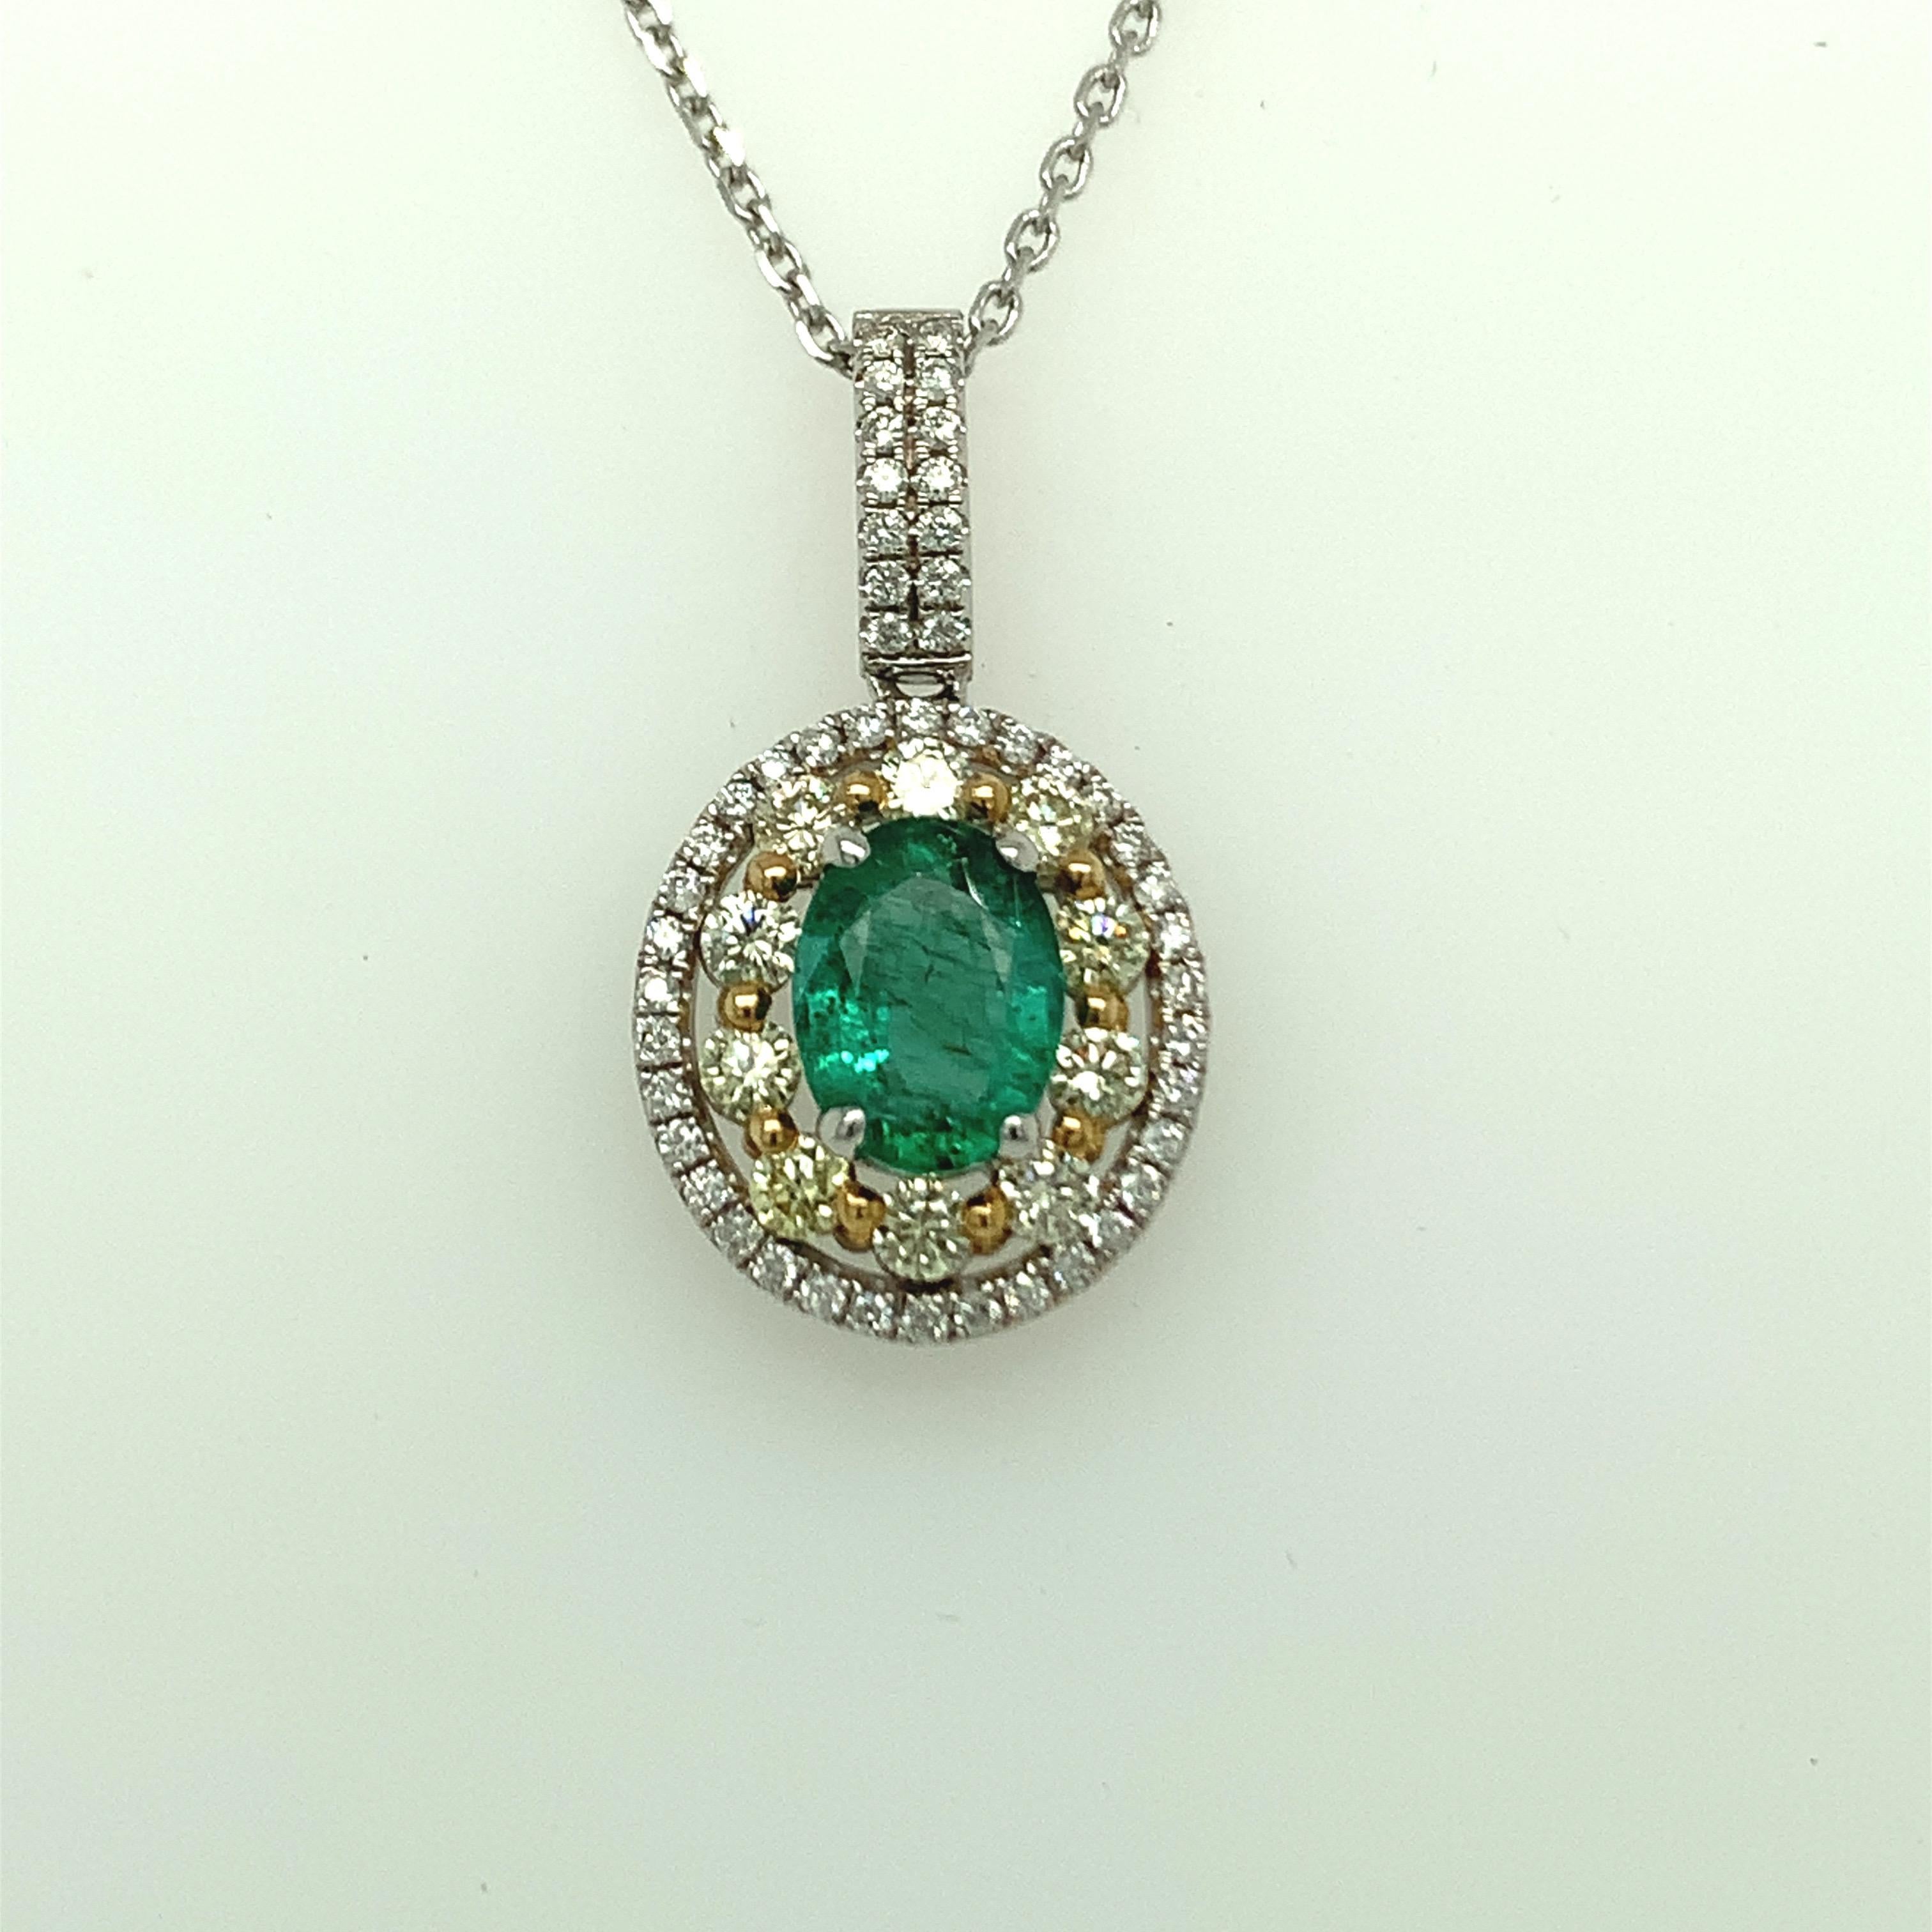 Oval emerald has double halo of yellow and white diamonds. Double halo makes the center stone stand out and look bigger. Set in two tone gold, a white gold chain is included. Crafted with hand.
Emerald: 1.24ct
White Diamond: 0.22ct
Yellow Diamond: